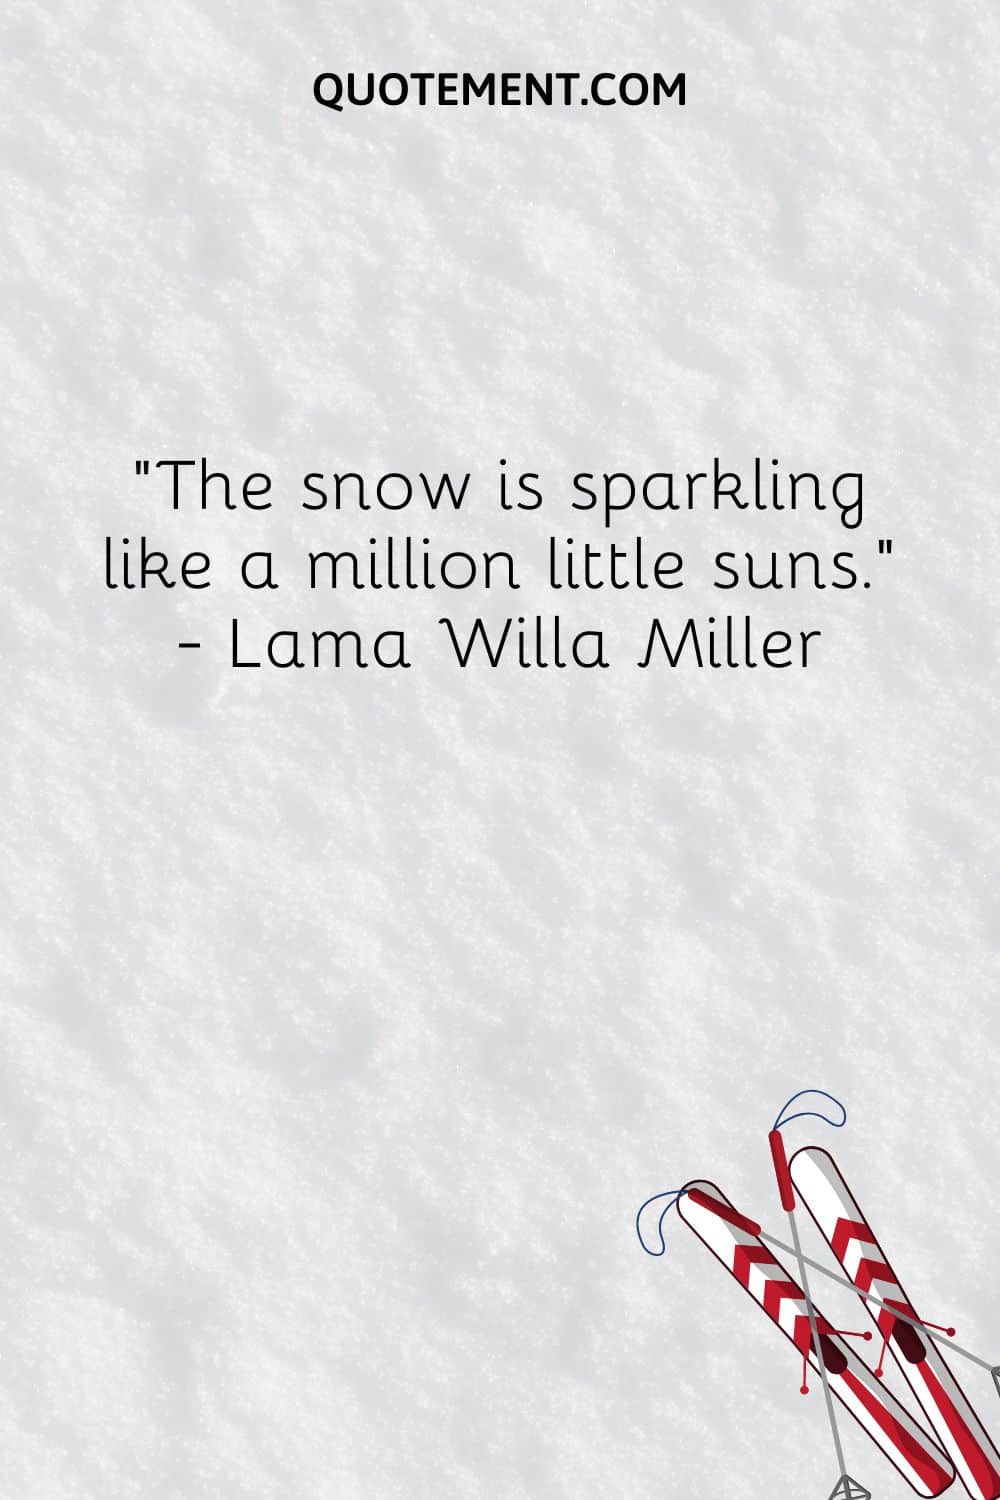 “The snow is sparkling like a million little suns.” — Lama Willa Miller